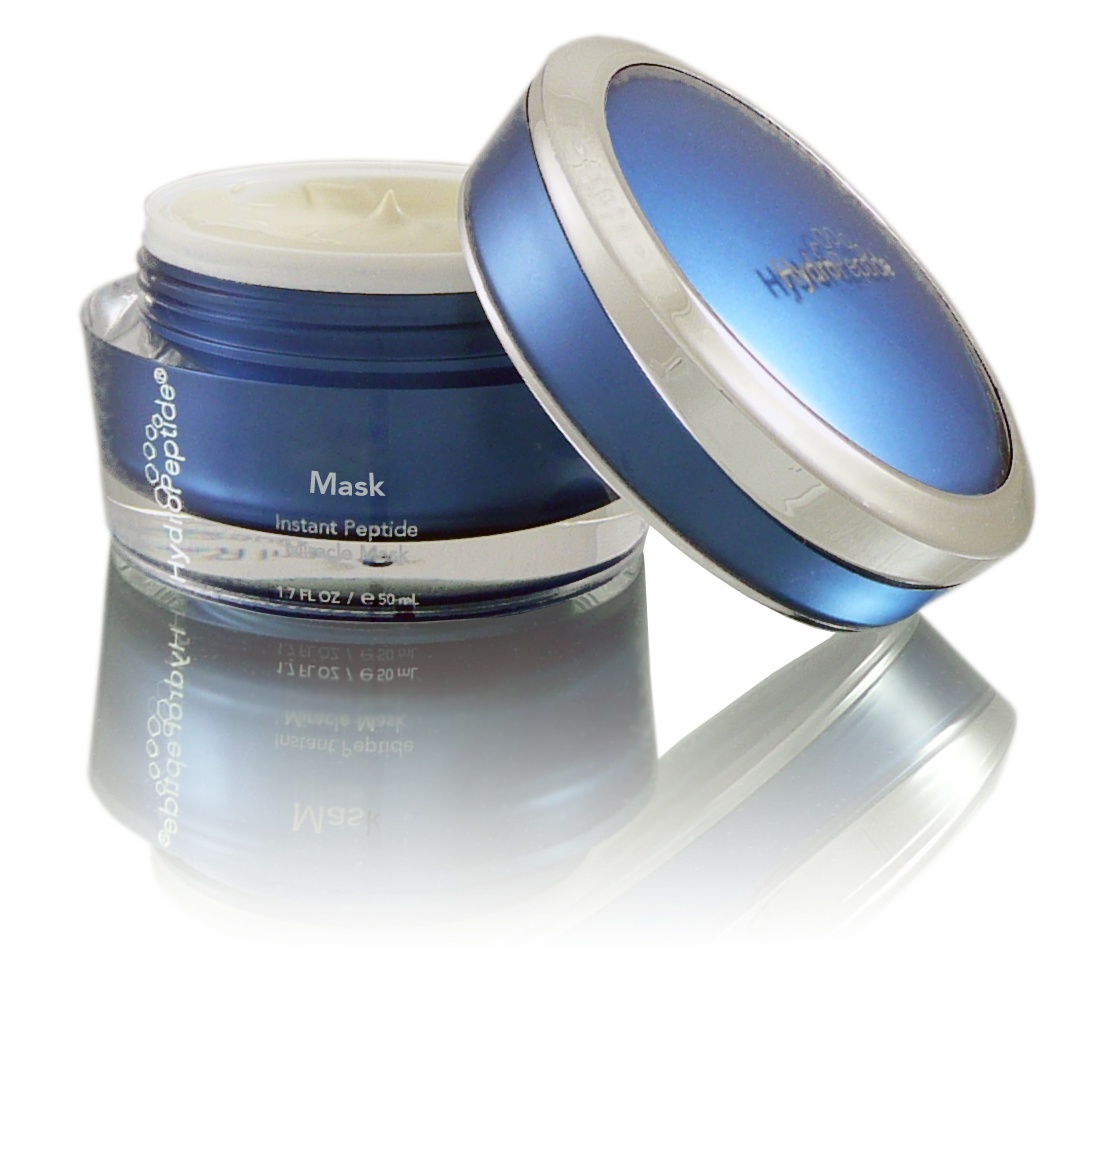 HydroPeptide Instant Peptide Miracle Mask